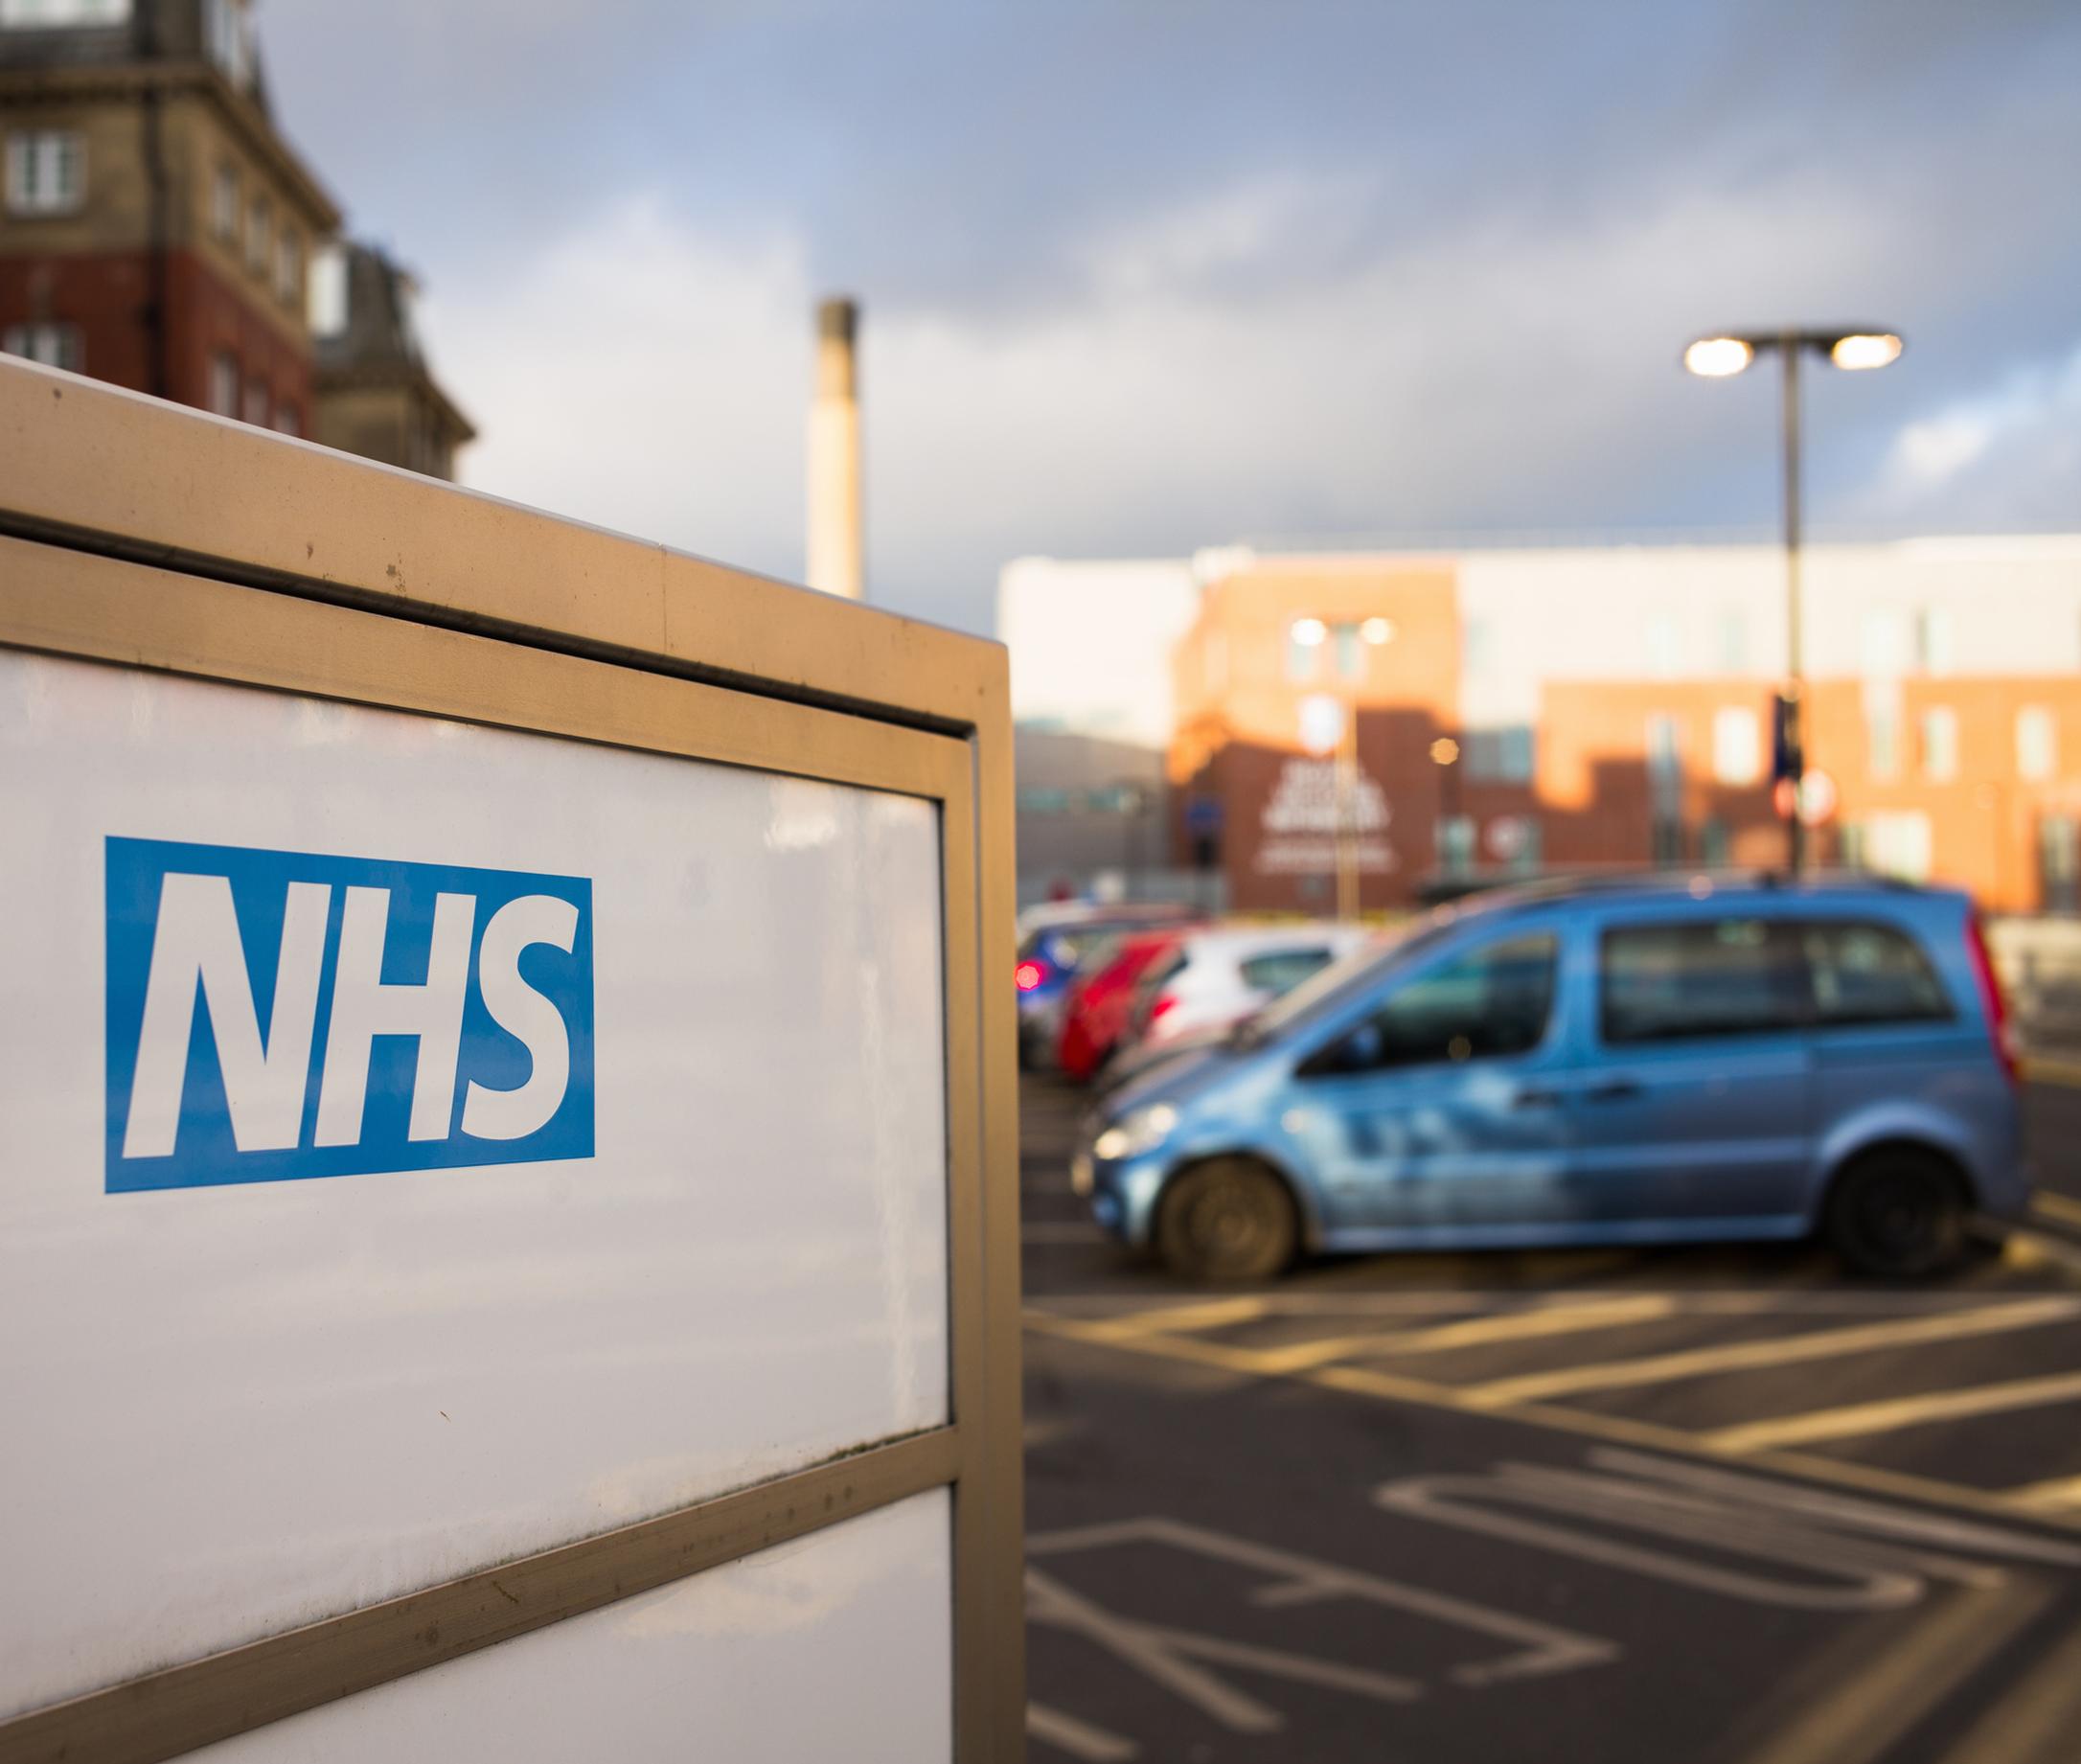 Hospital car park fees were waived during the pandemic, but the benefit came to an end on Friday 31 March